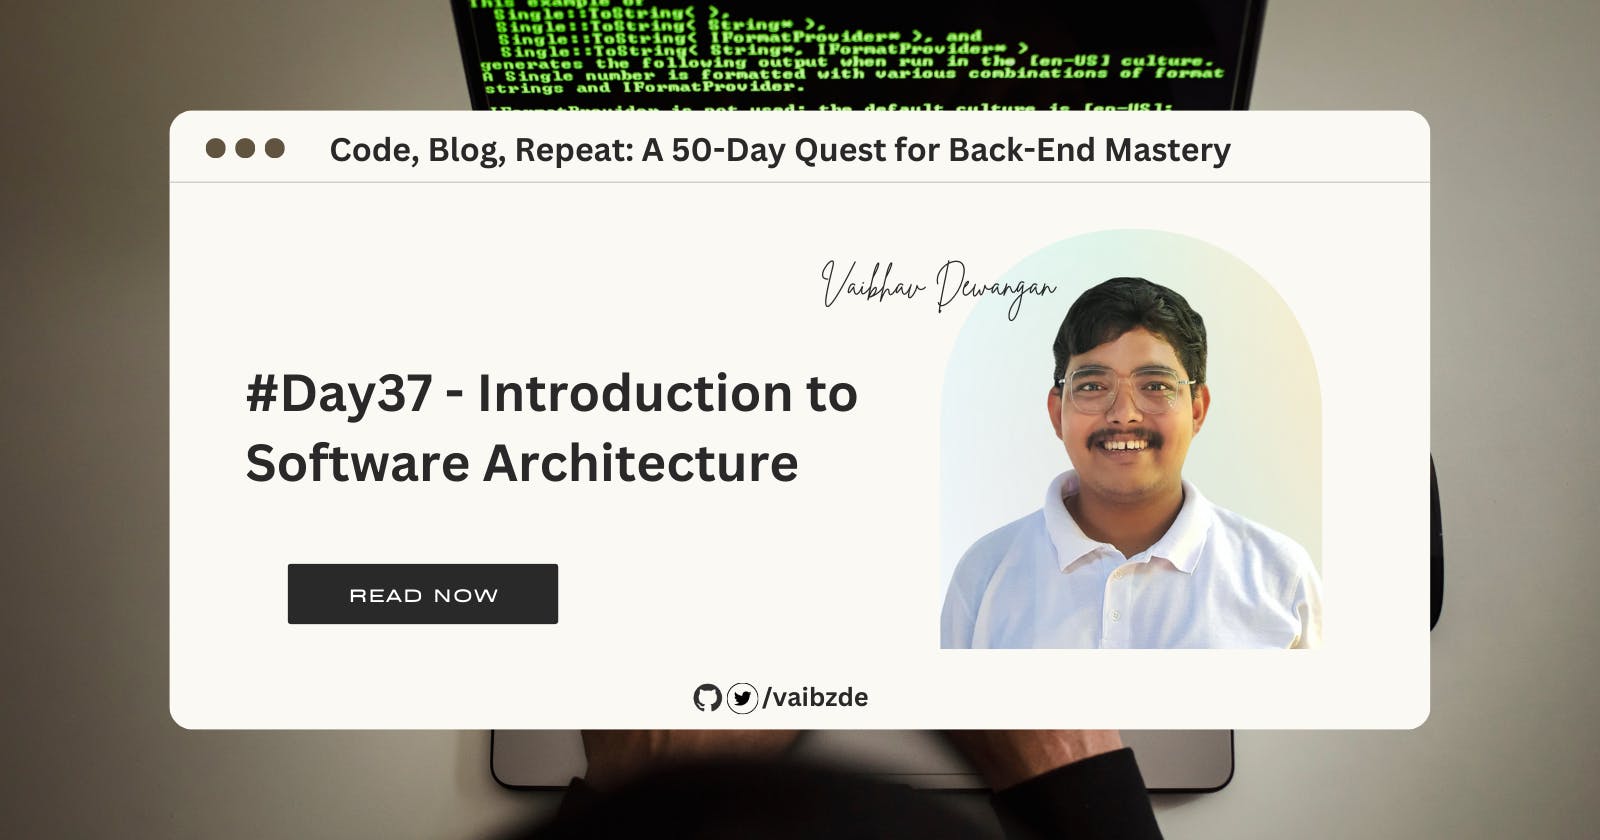 #Day37 - Introduction to Software Architecture